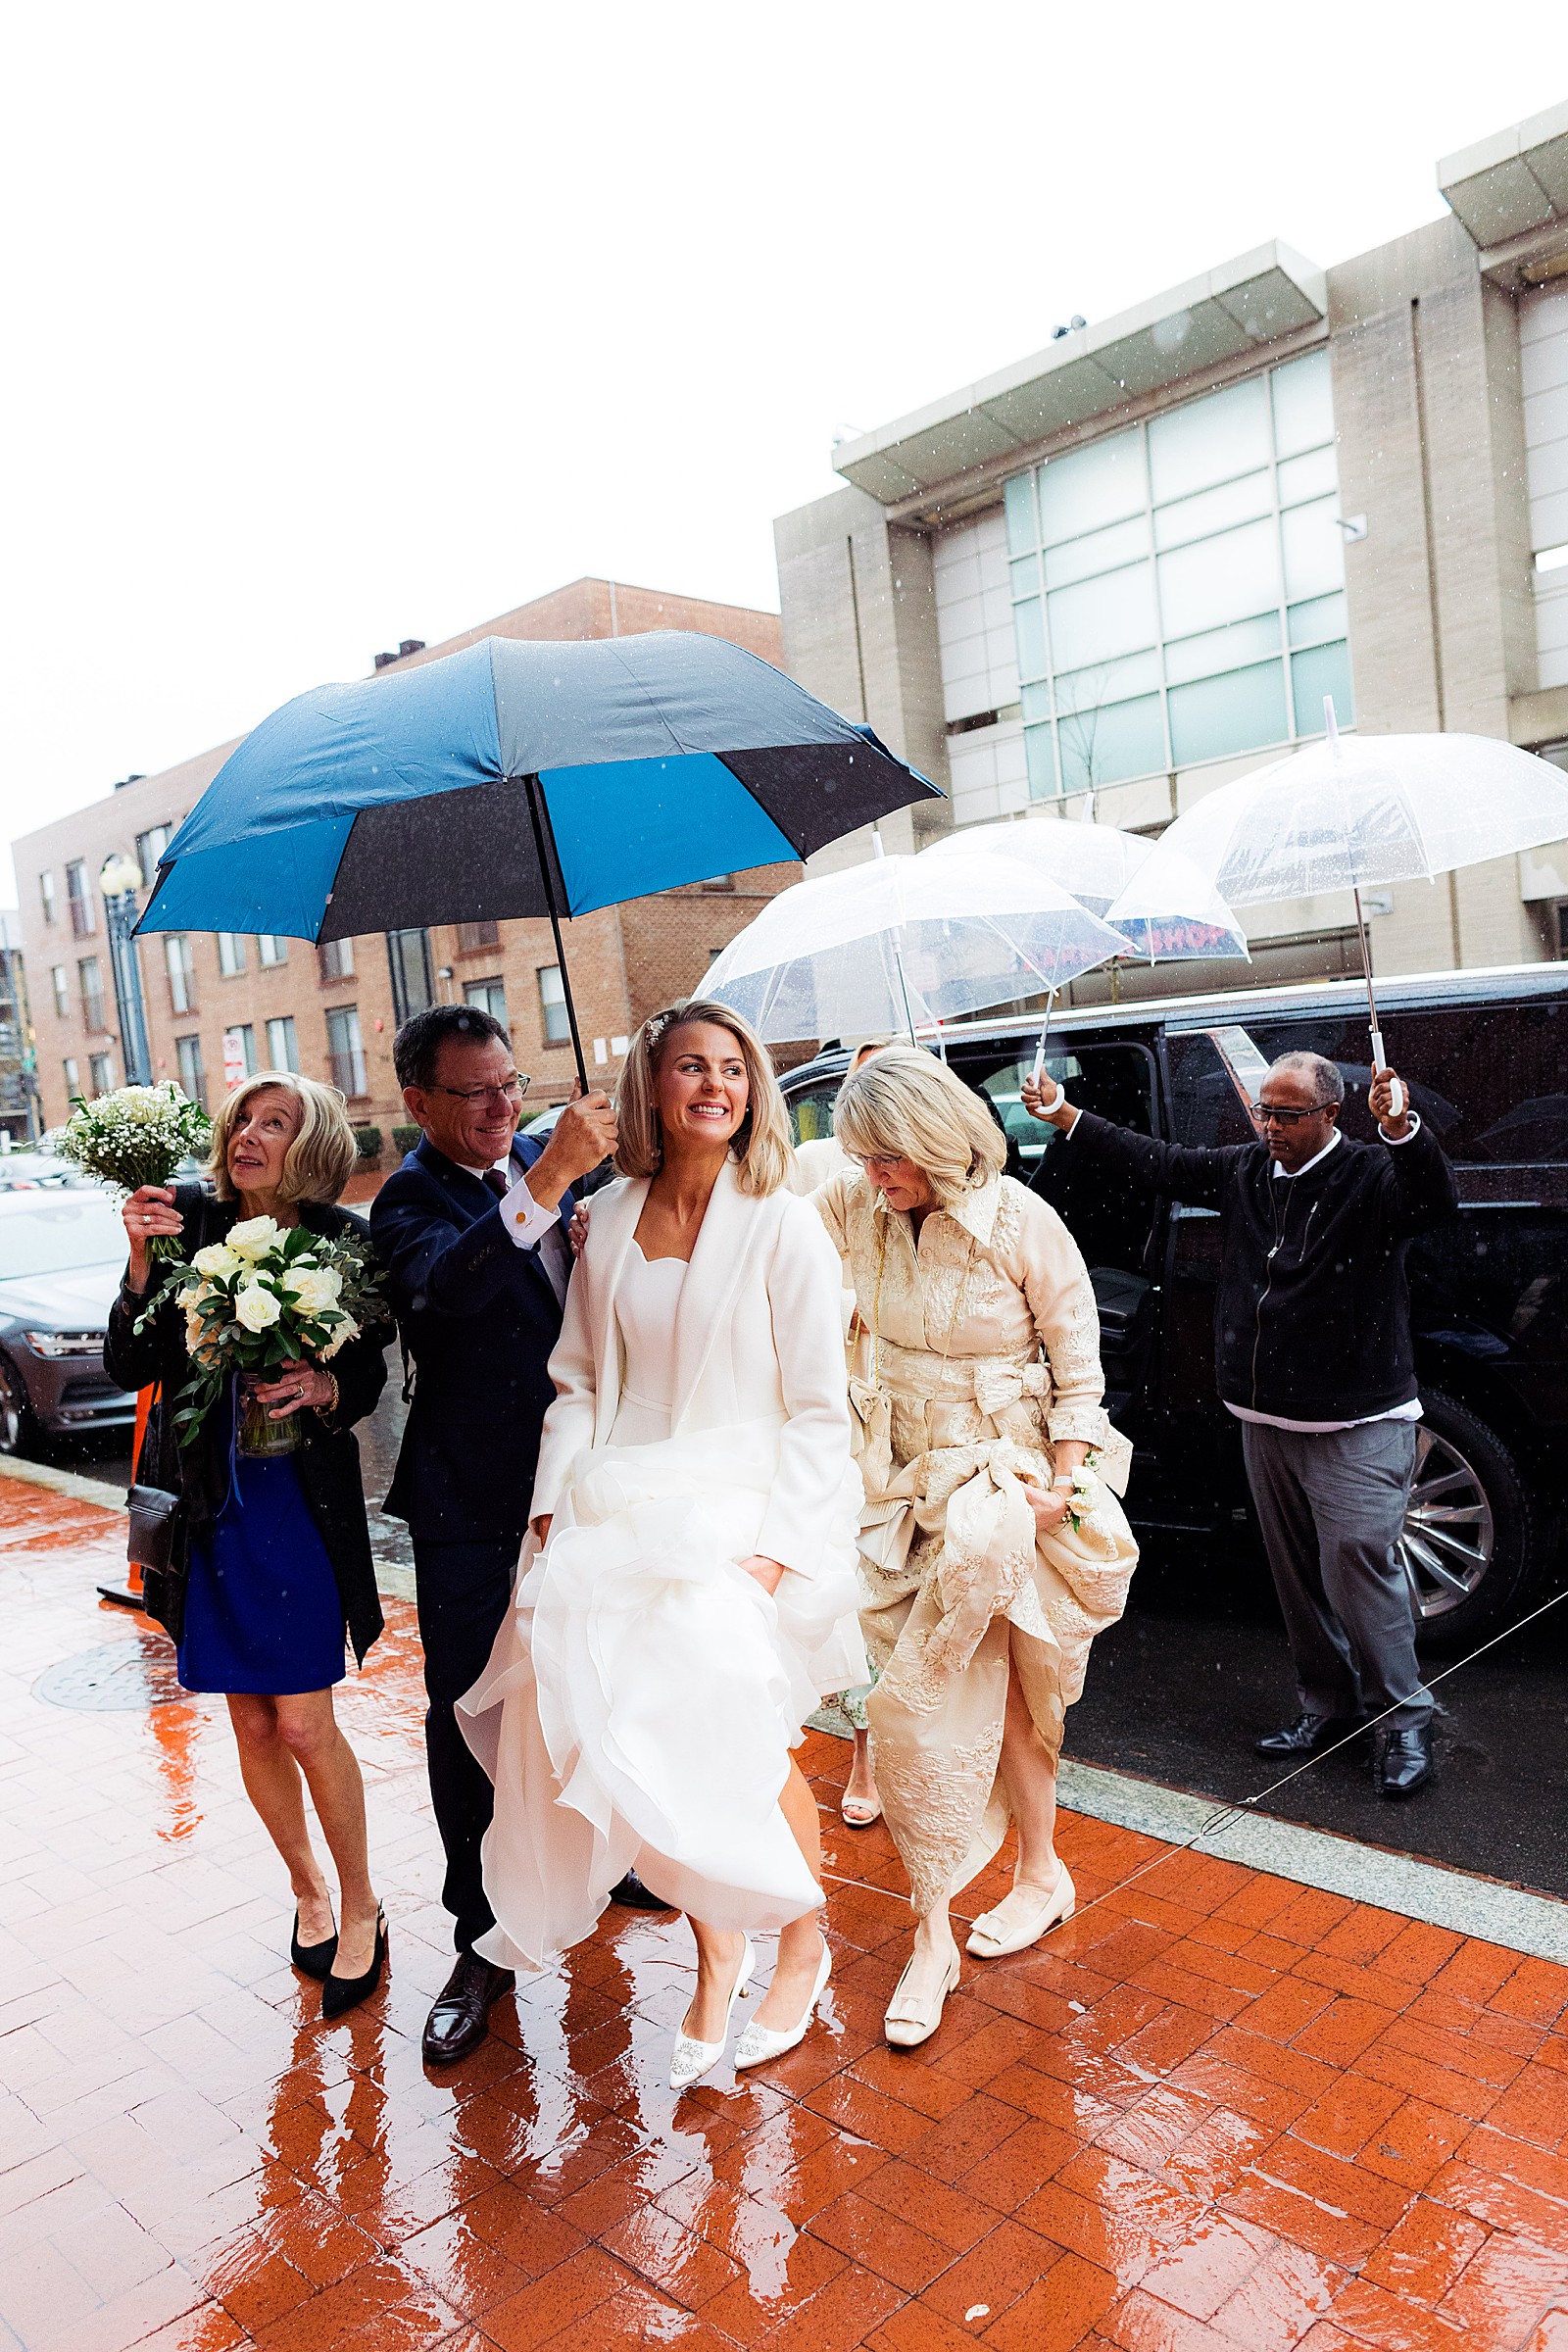 Bride gets escorted out of the car by multiple people holding umbrellas over her head on the way to her rainy wedding at Immaculate Conception church in DC.